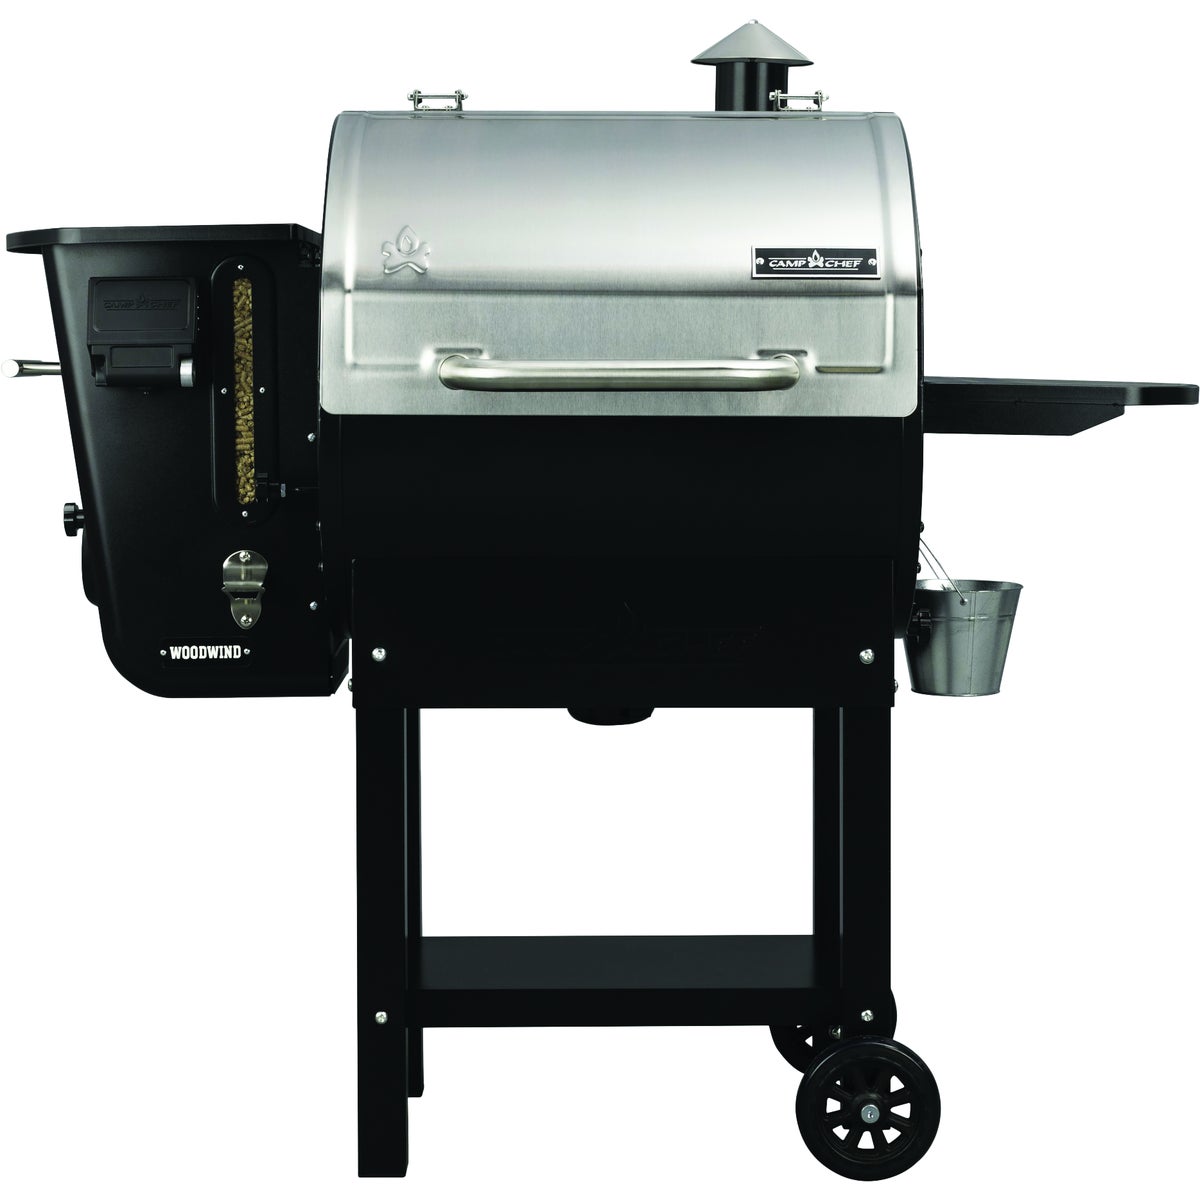 Camp Chef Woodwind WiFi 24 Stainless 800 Sq. In. Wood Pellet Grill & Smoker